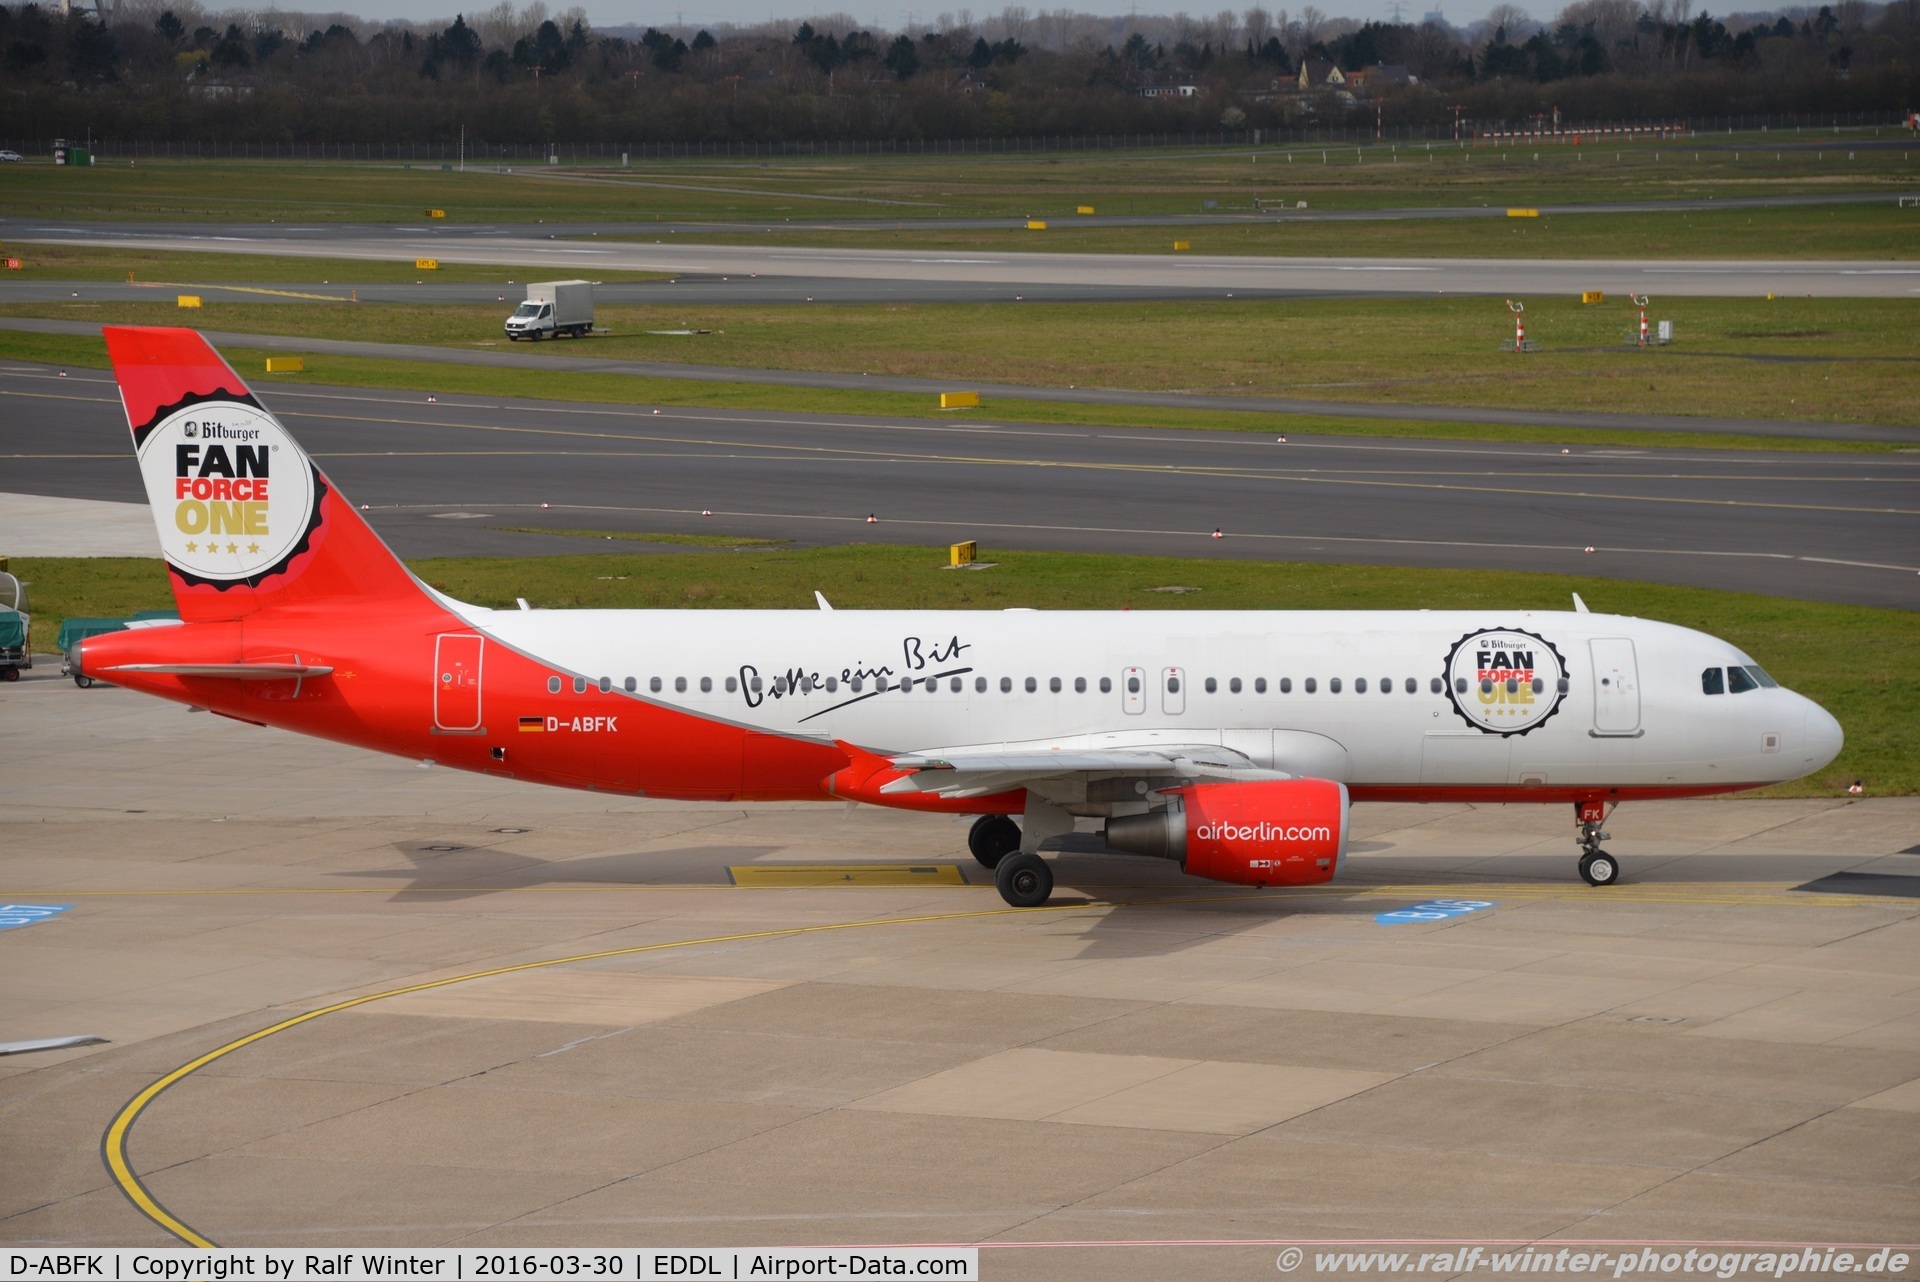 D-ABFK, 2010 Airbus A320-214 C/N 4433, Airbus A320-214 - AB BER Air Berlin 'Fan Force One' - D-ABFK - 30.03.2016 - DUS